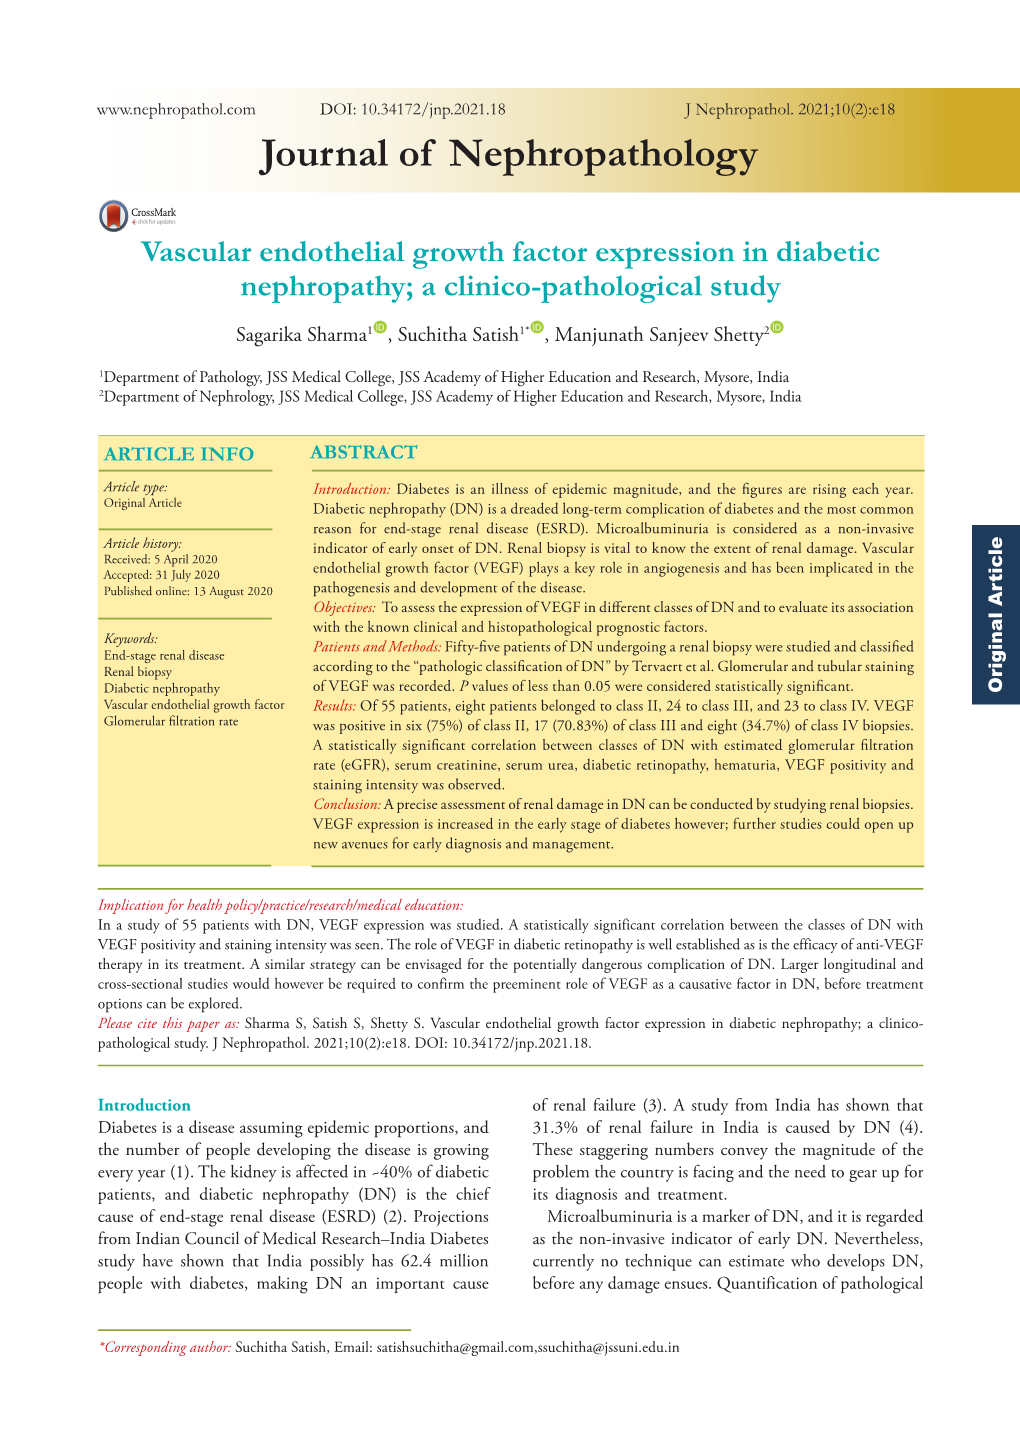 Vascular Endothelial Growth Factor Expression in Diabetic Nephropathy; a Clinico-Pathological Study